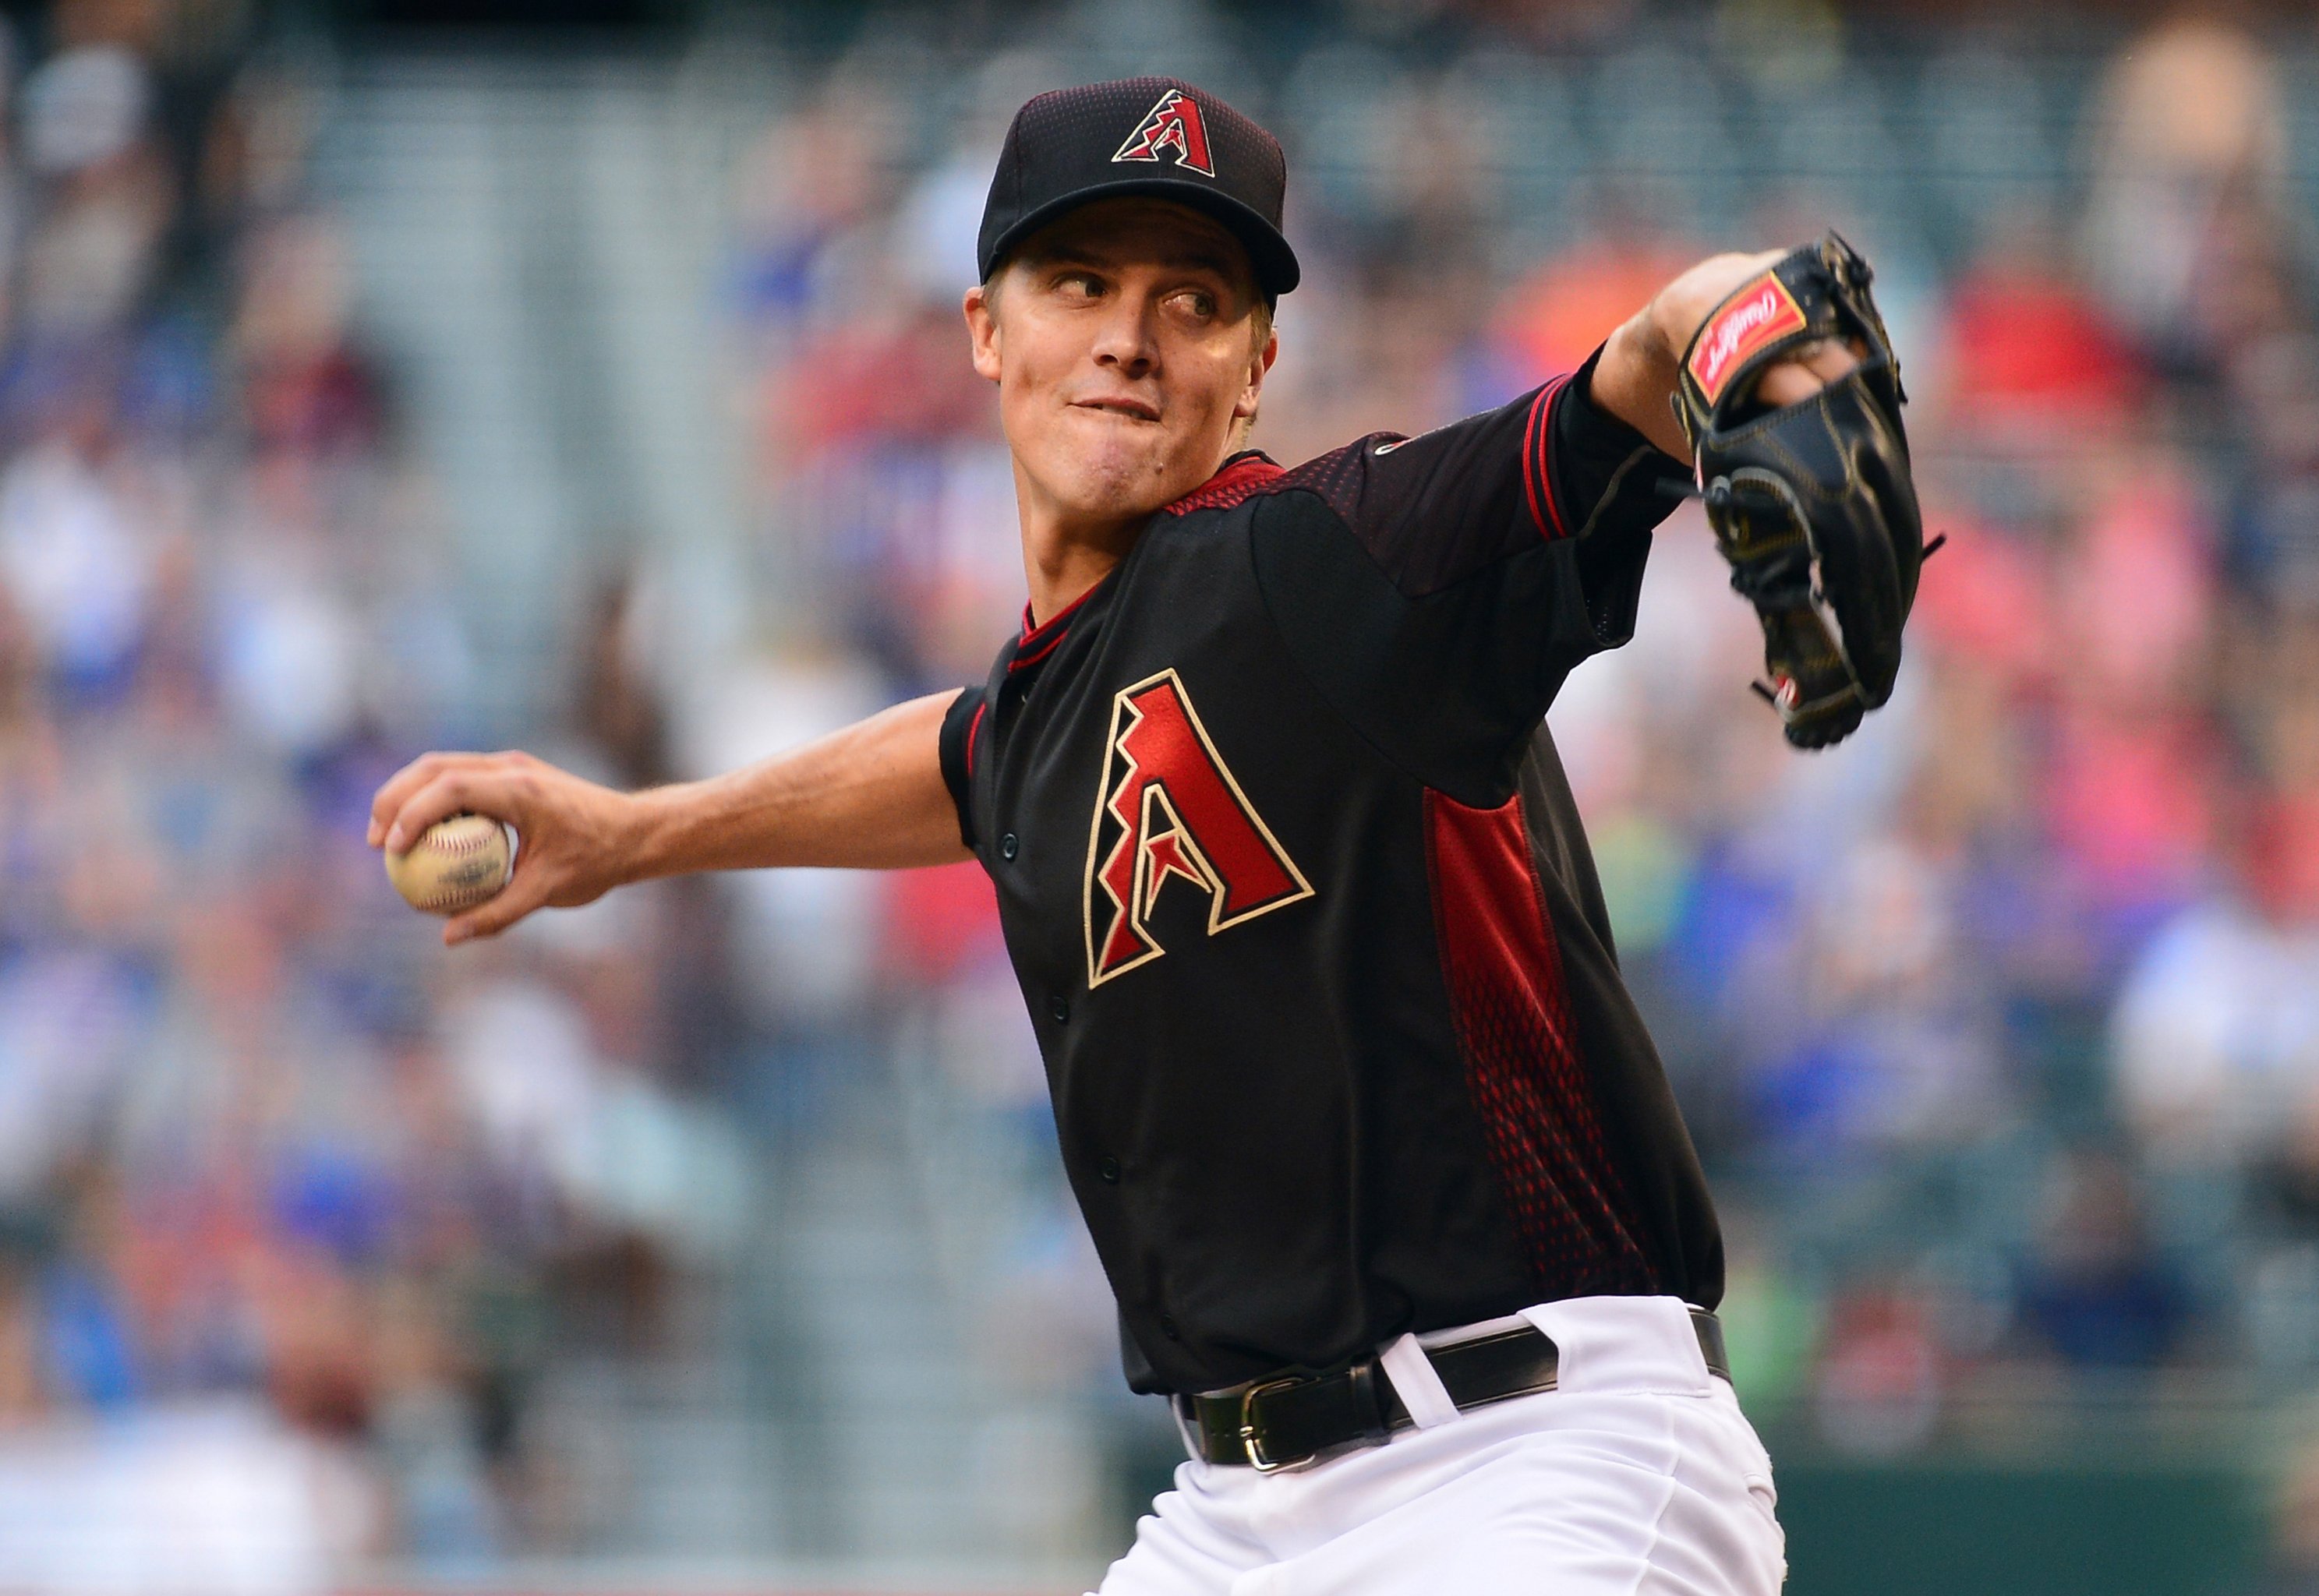 Zack Greinke does a lot more than pitch for the Diamondbacks